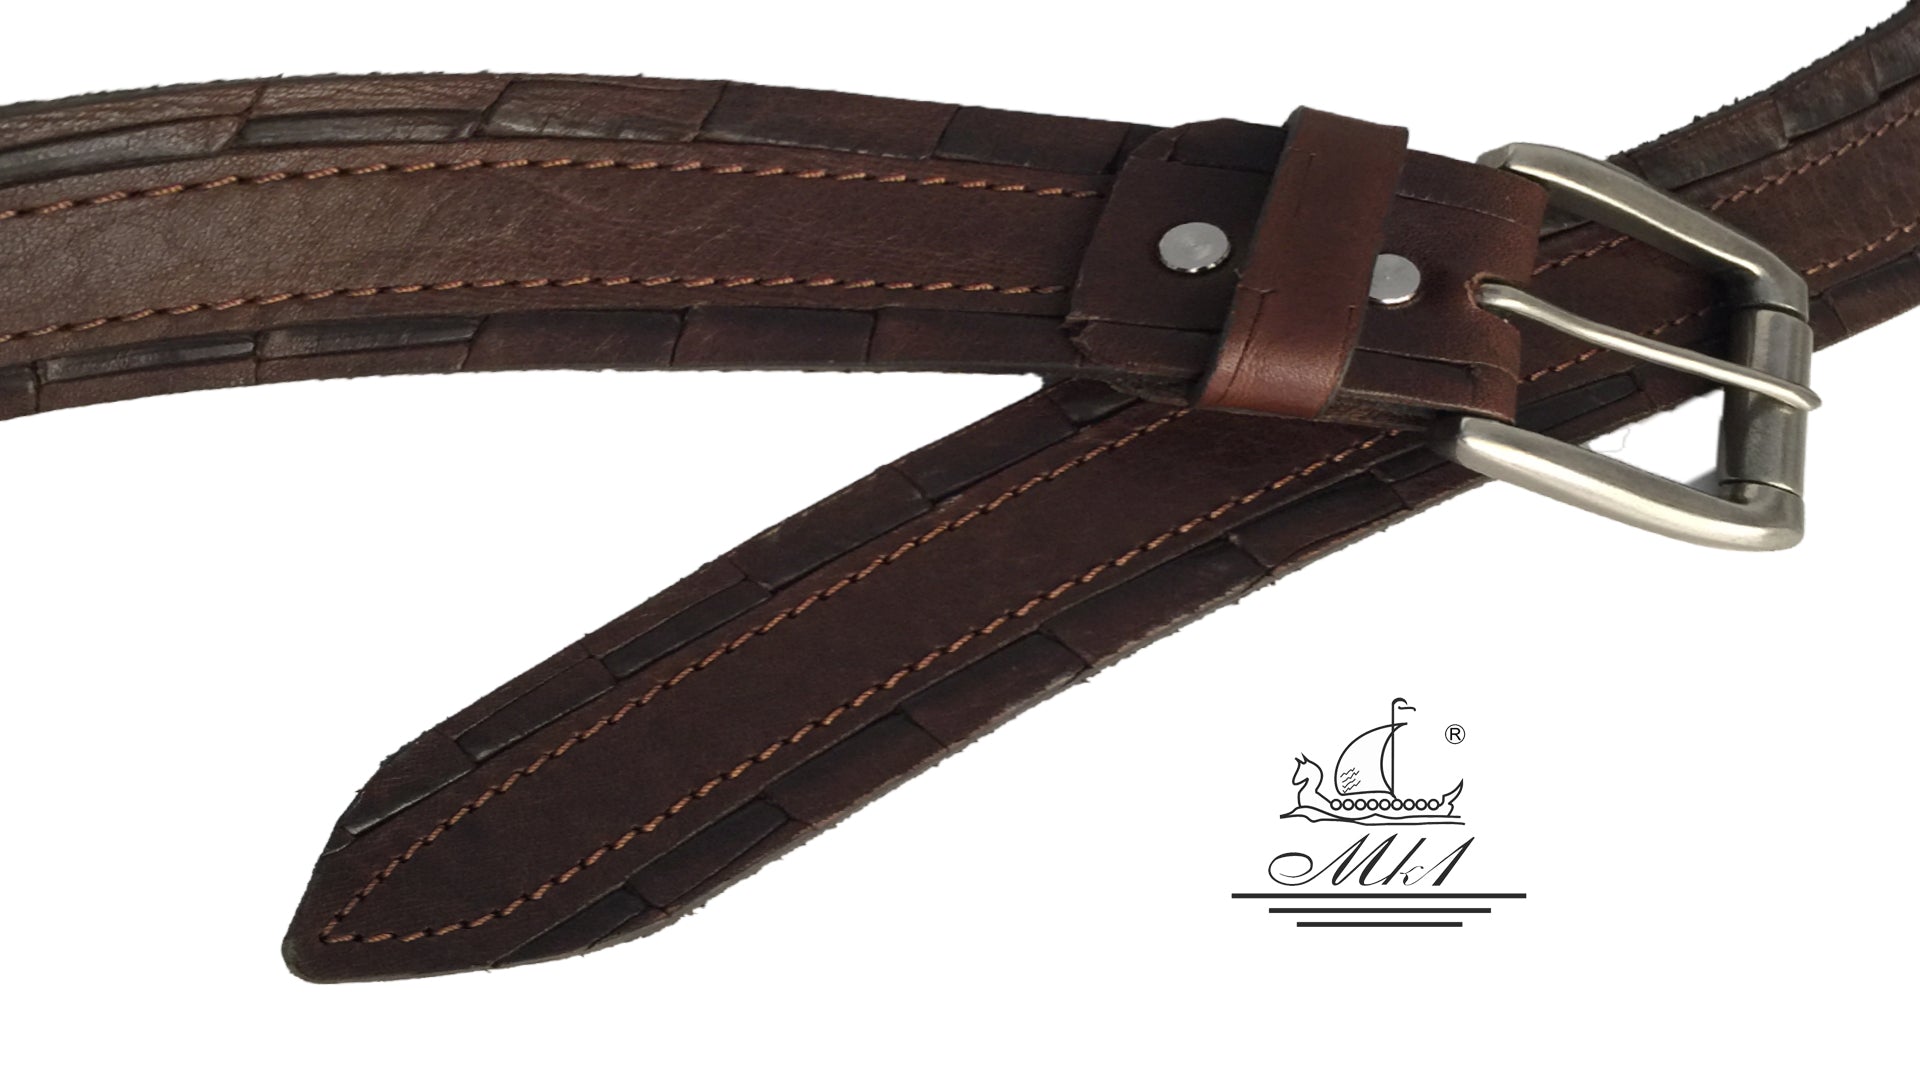 22/40k-kr-g Hand made  leather belt, 4 cm width, and  roll buckle.